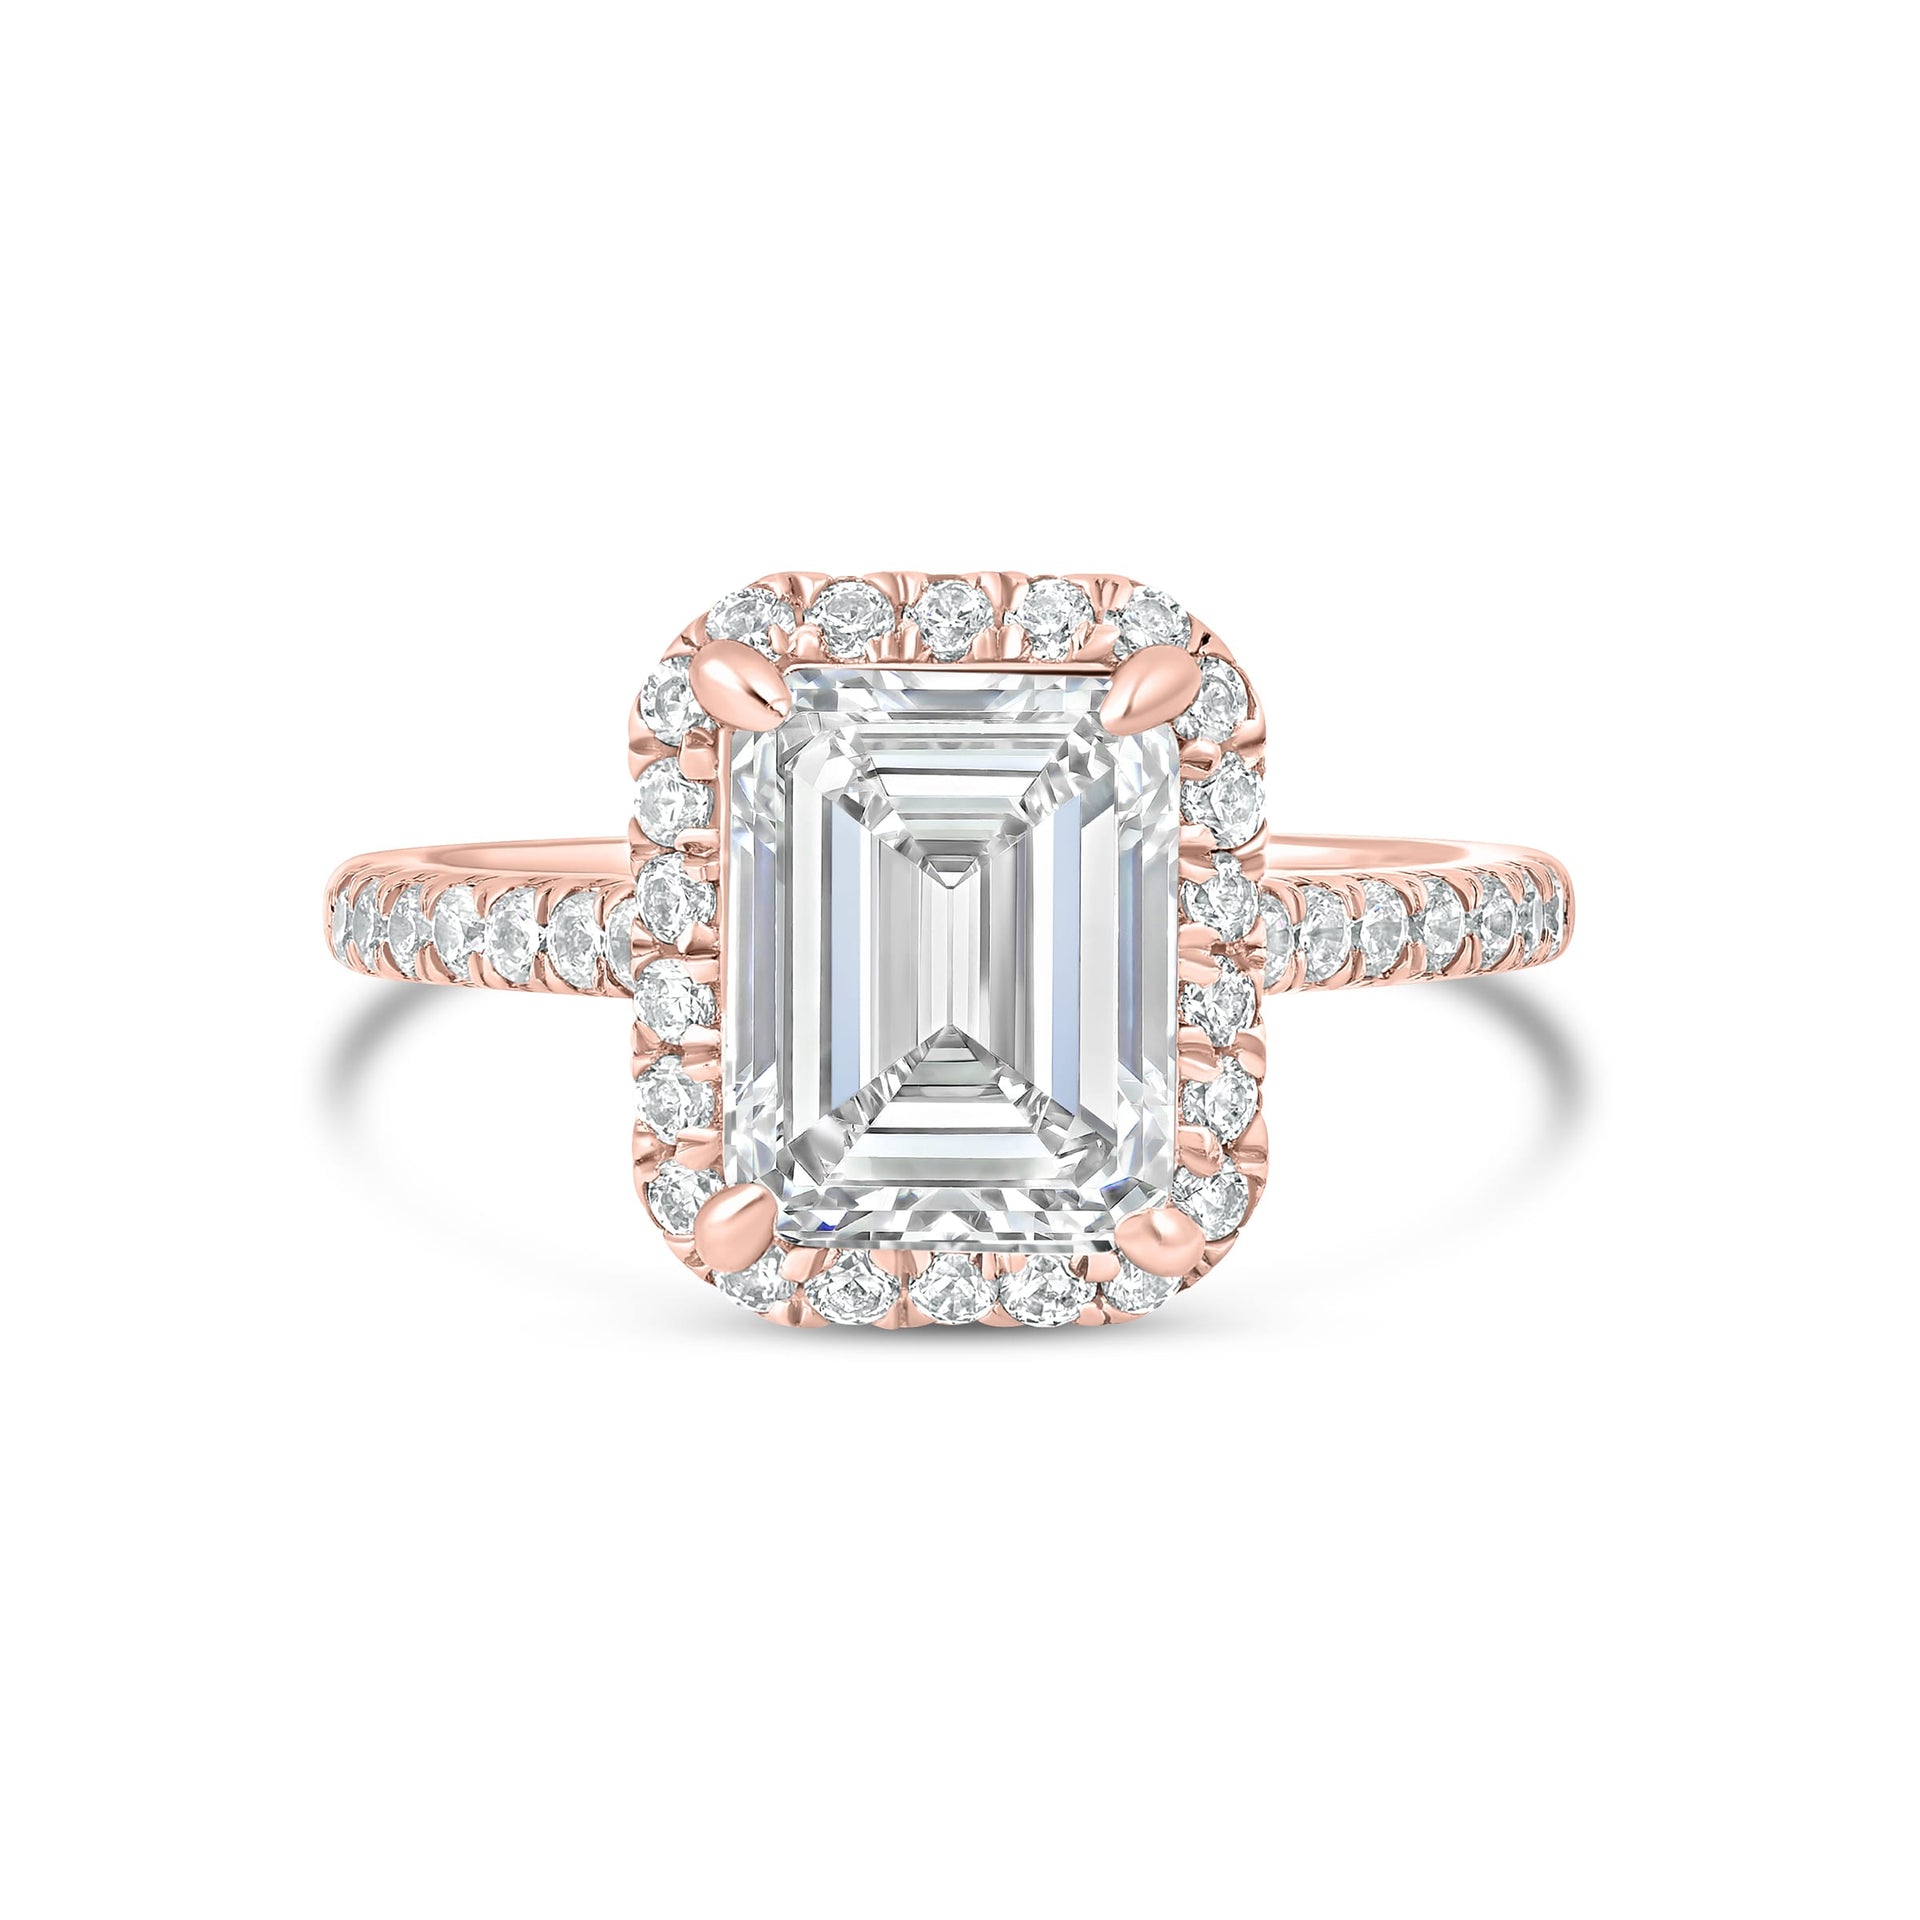 Rose gold 3 carat emerald cut engagement ring with half eternity band detailing